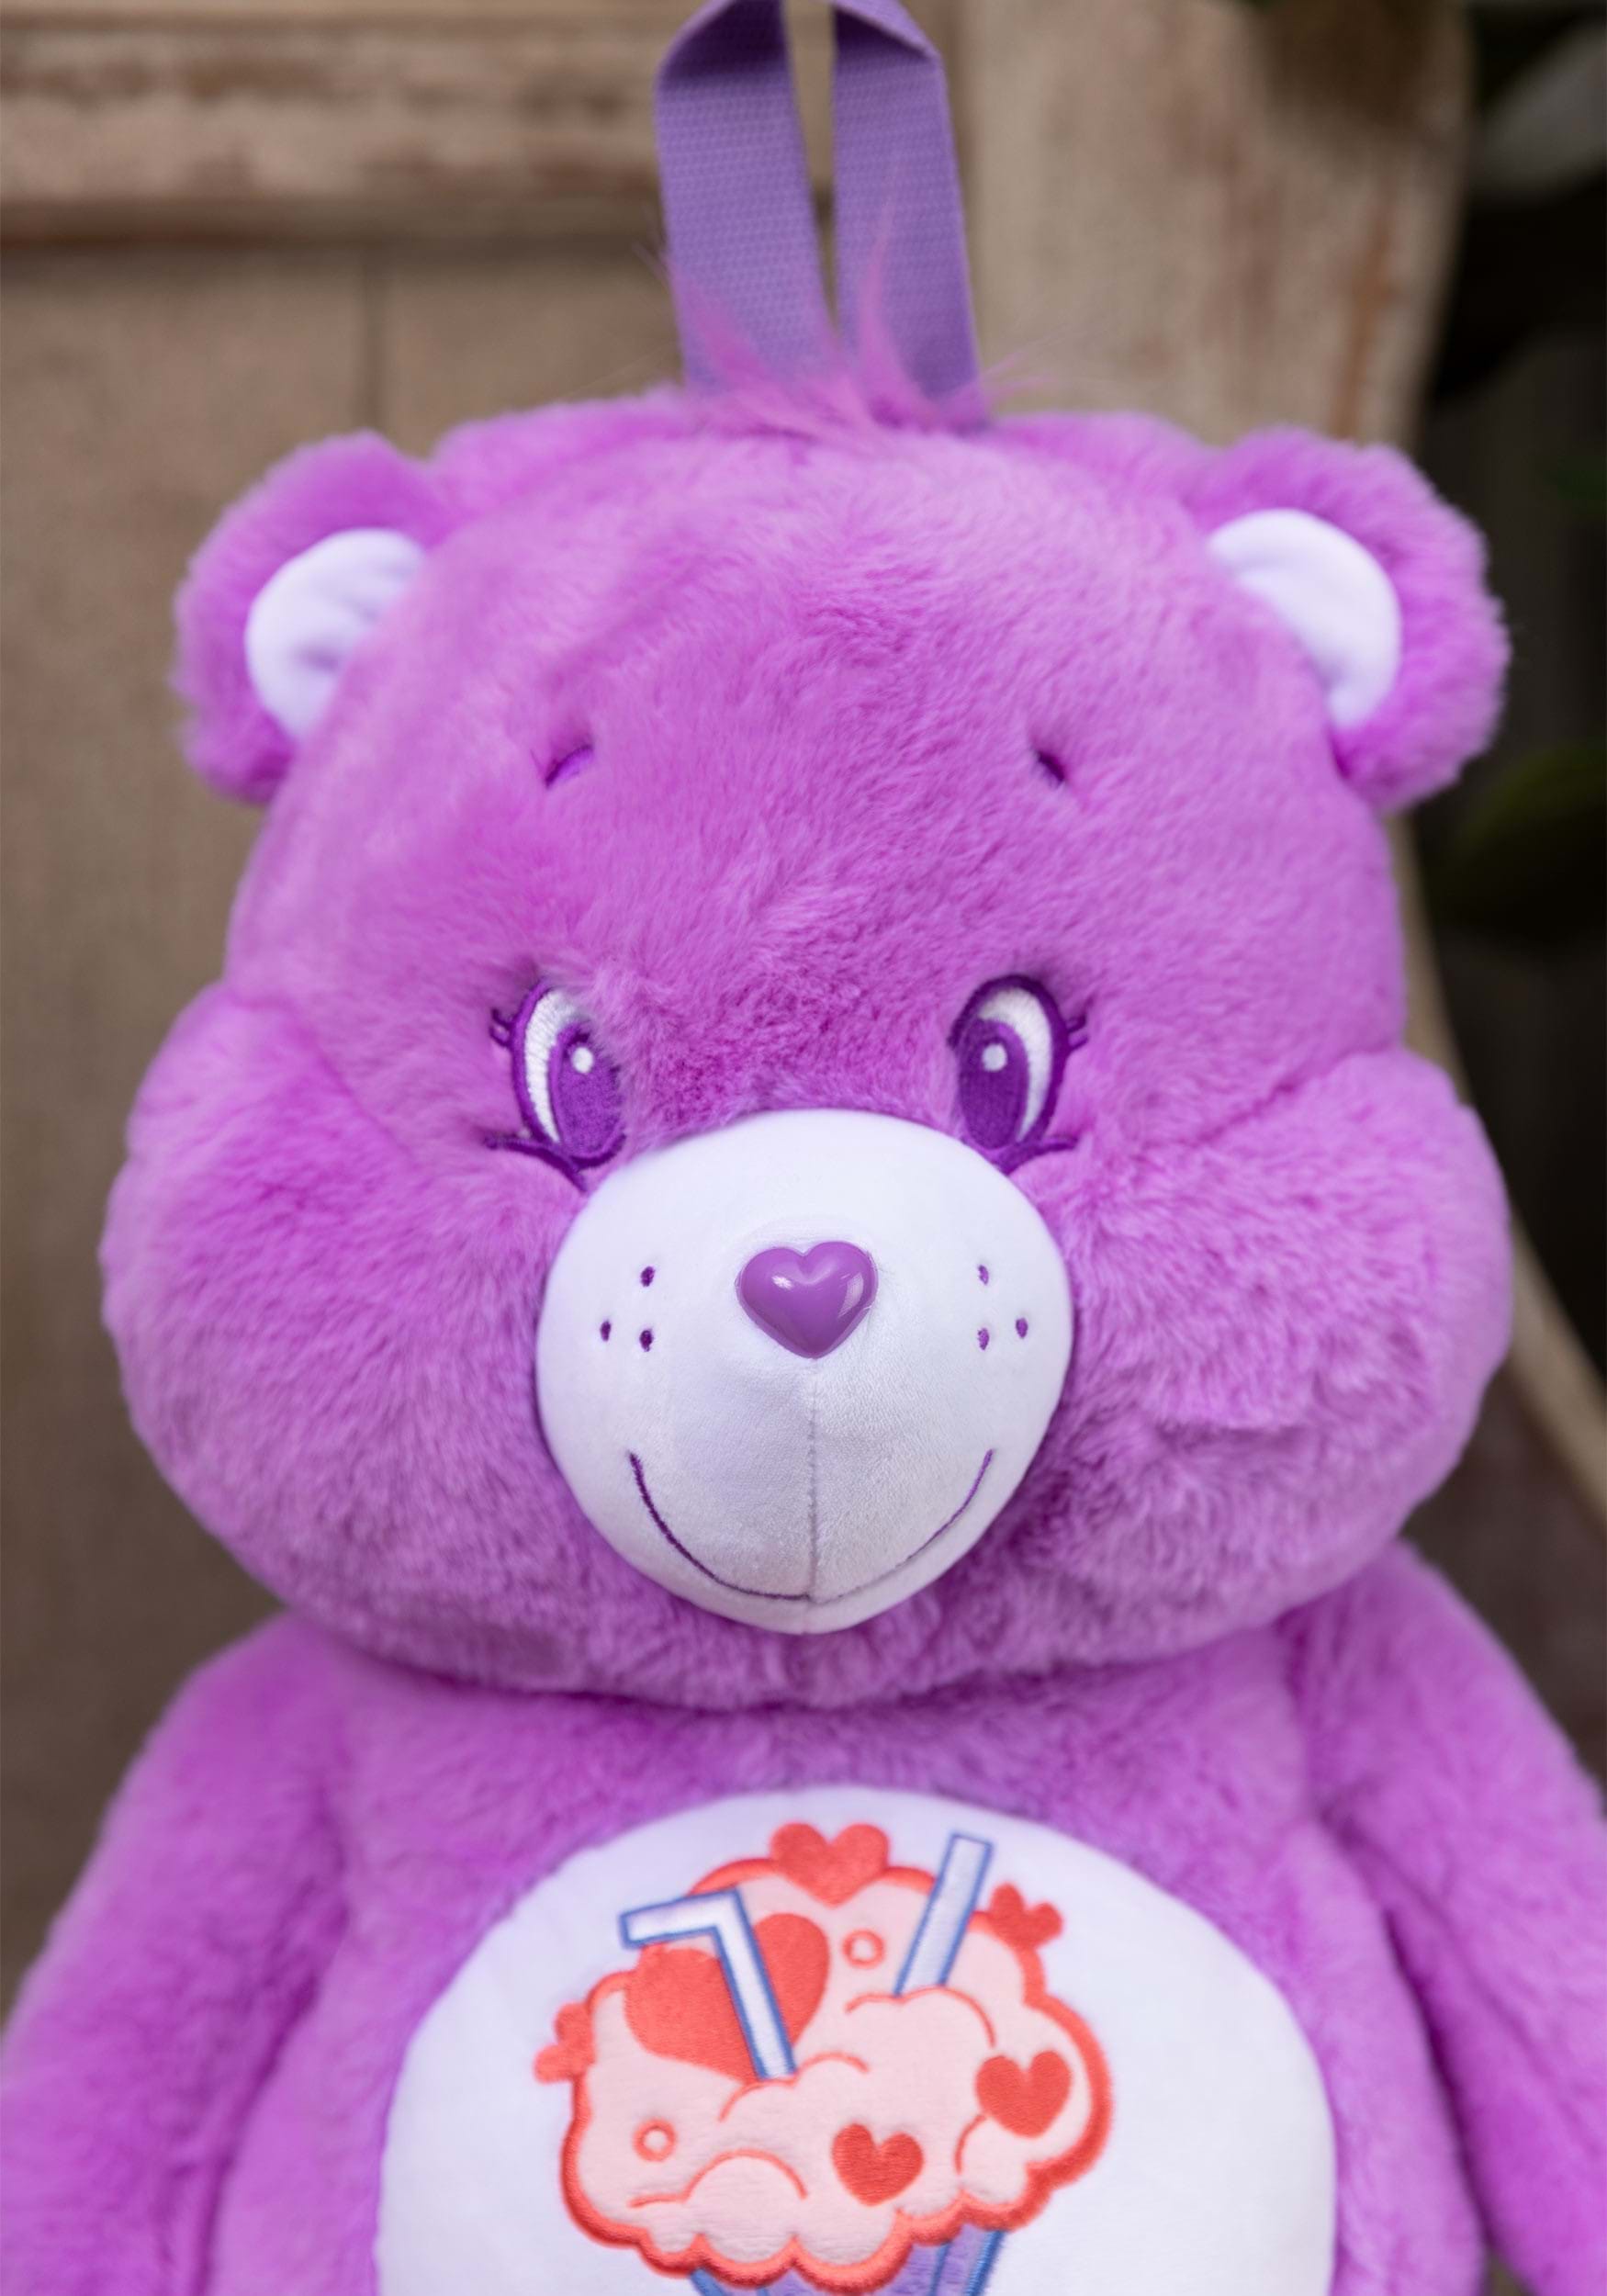 Valuable Vintage Care Bears That You Might Still Have